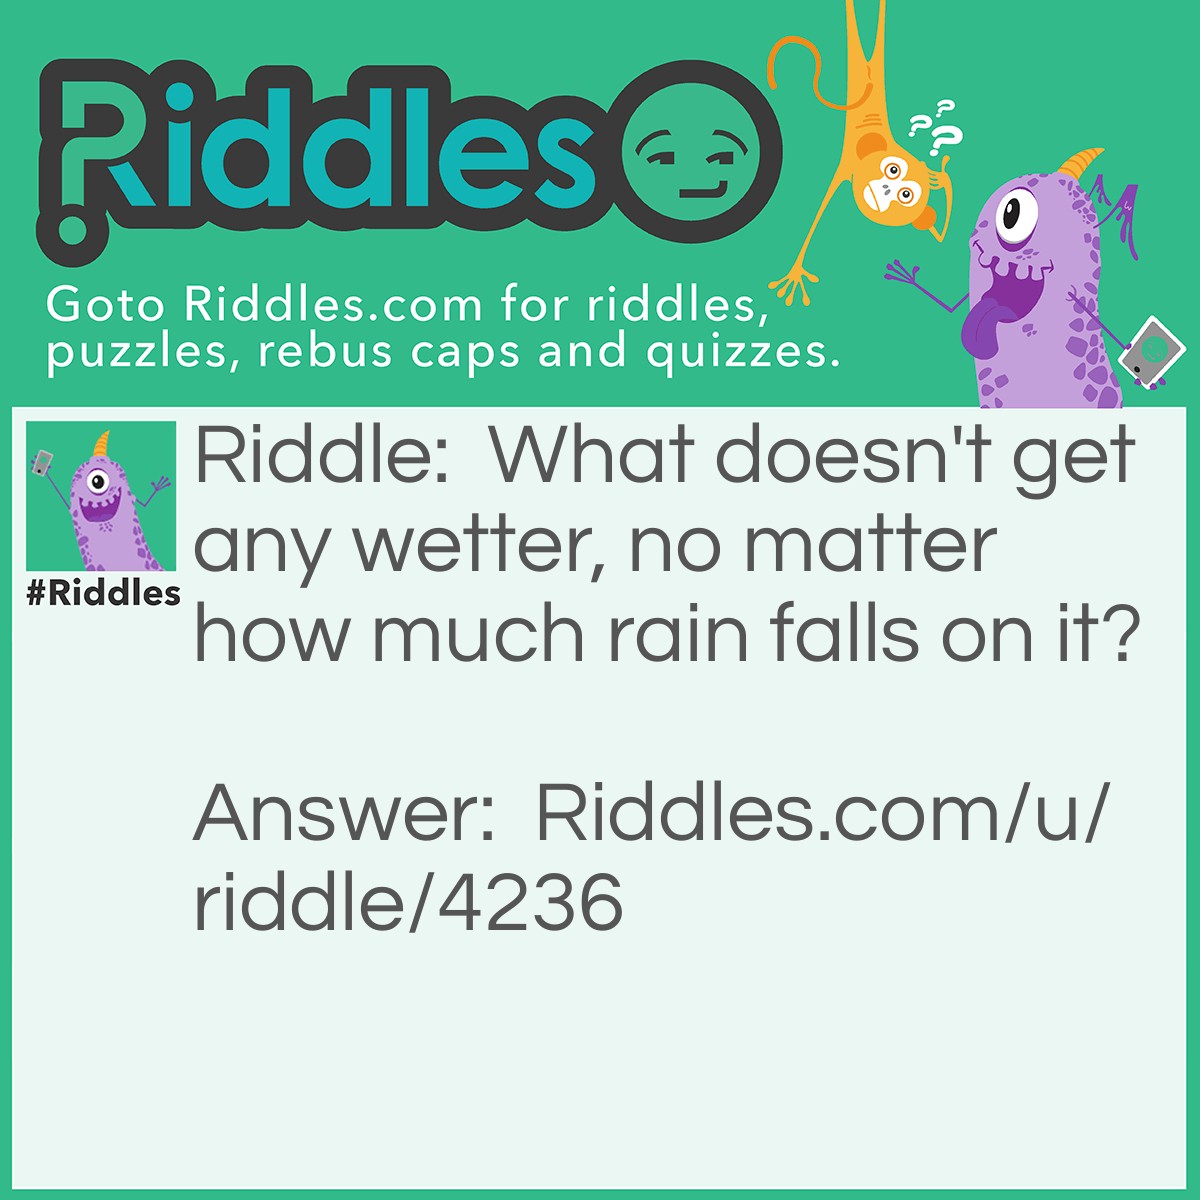 Riddle: What doesn't get any wetter, no matter how much rain falls on it? Answer: Water.